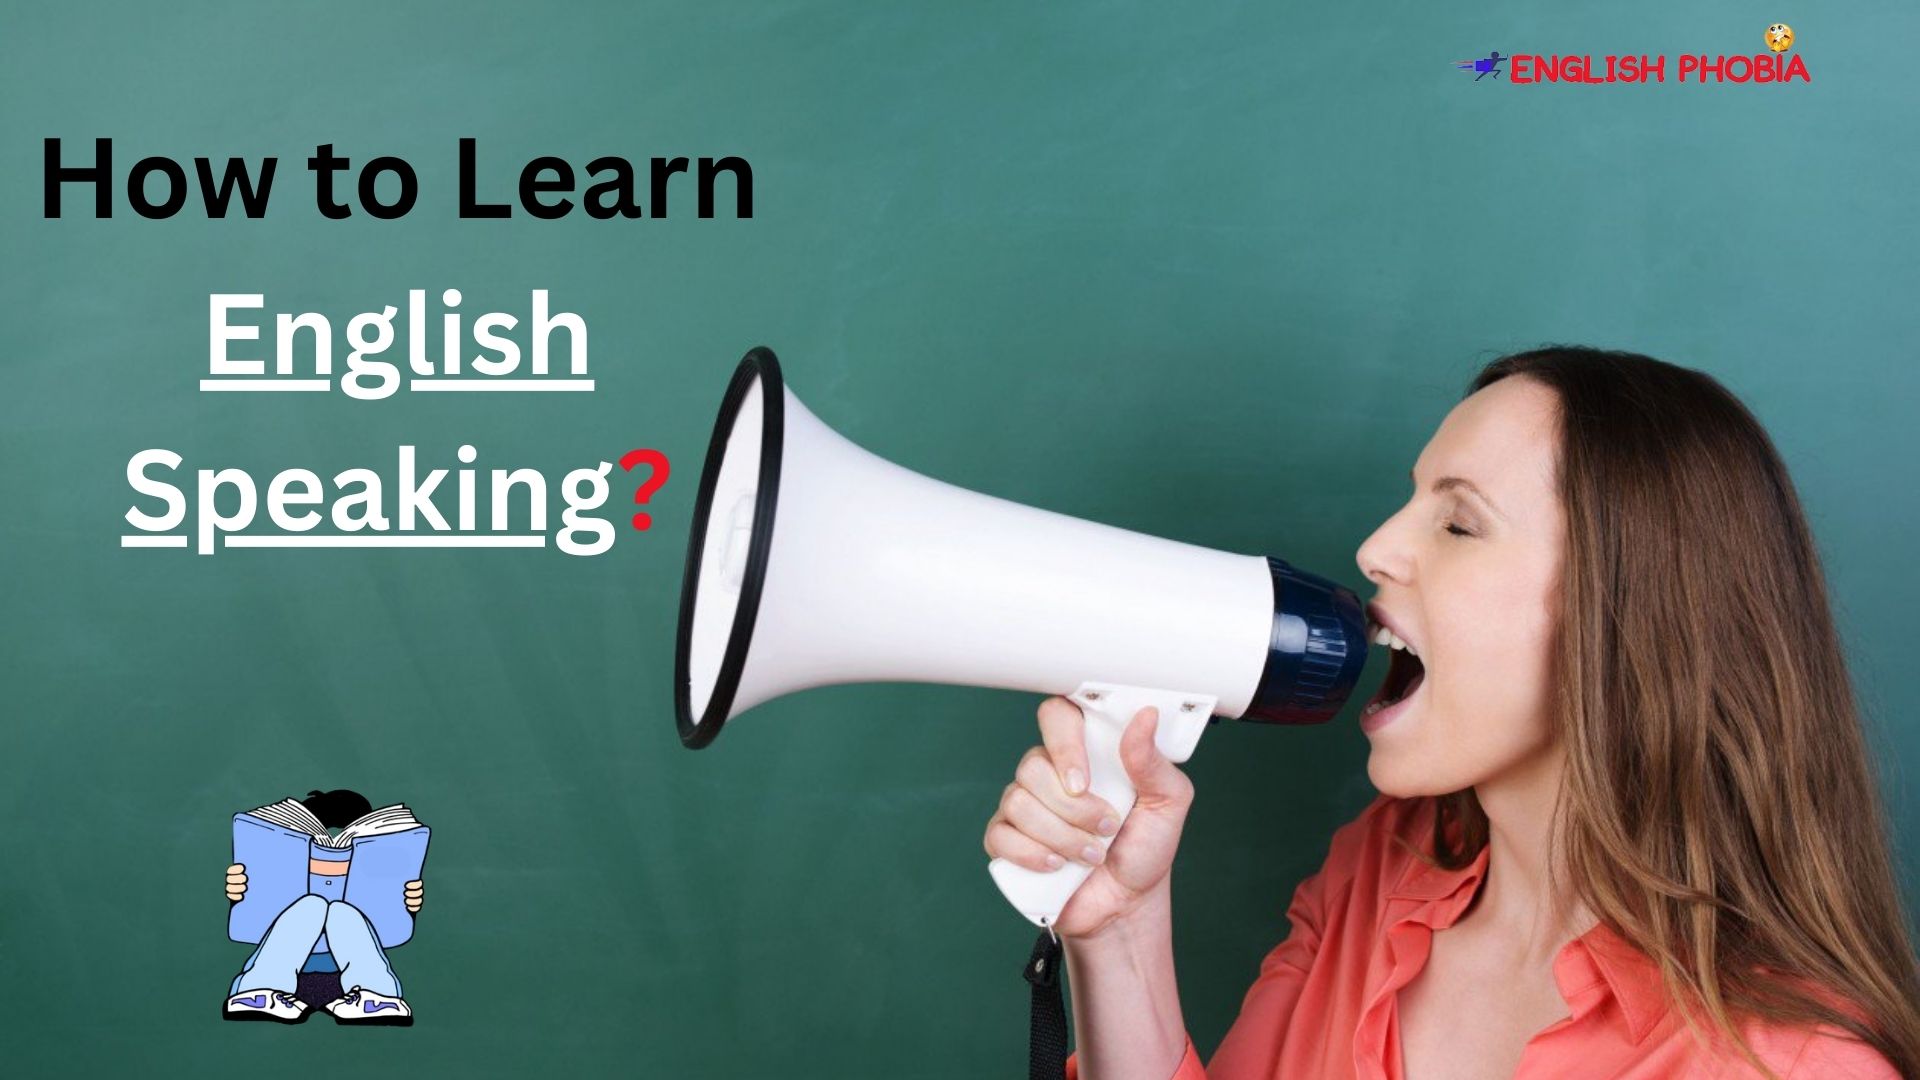 How to Learn English Speaking